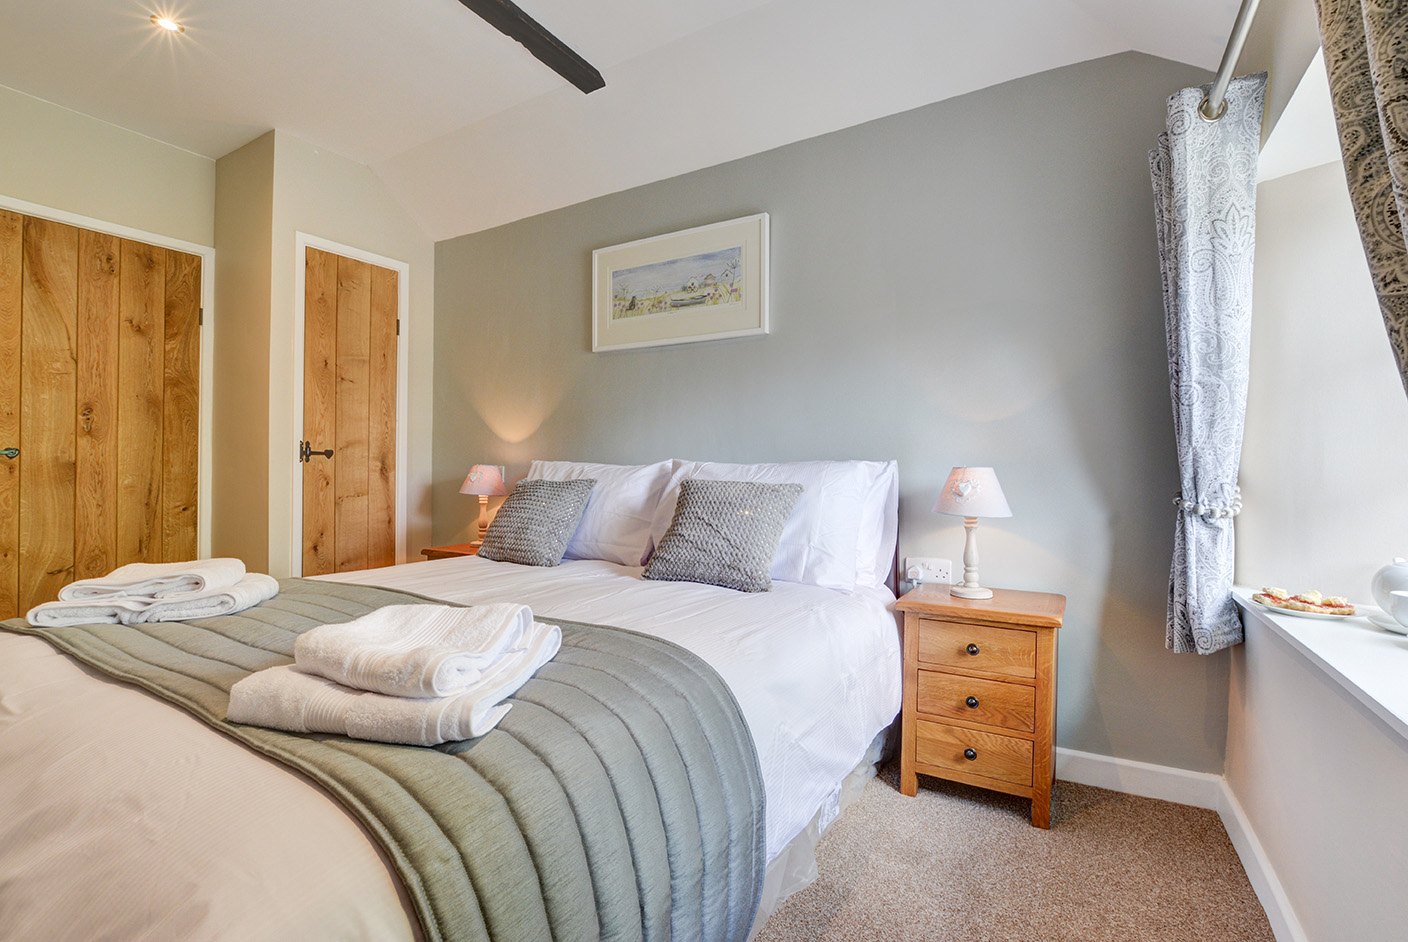 The first bedroom of Goosehill luxury self catering converted barn holiday cottage at Penrose Burden in North Cornwall 02.jpg